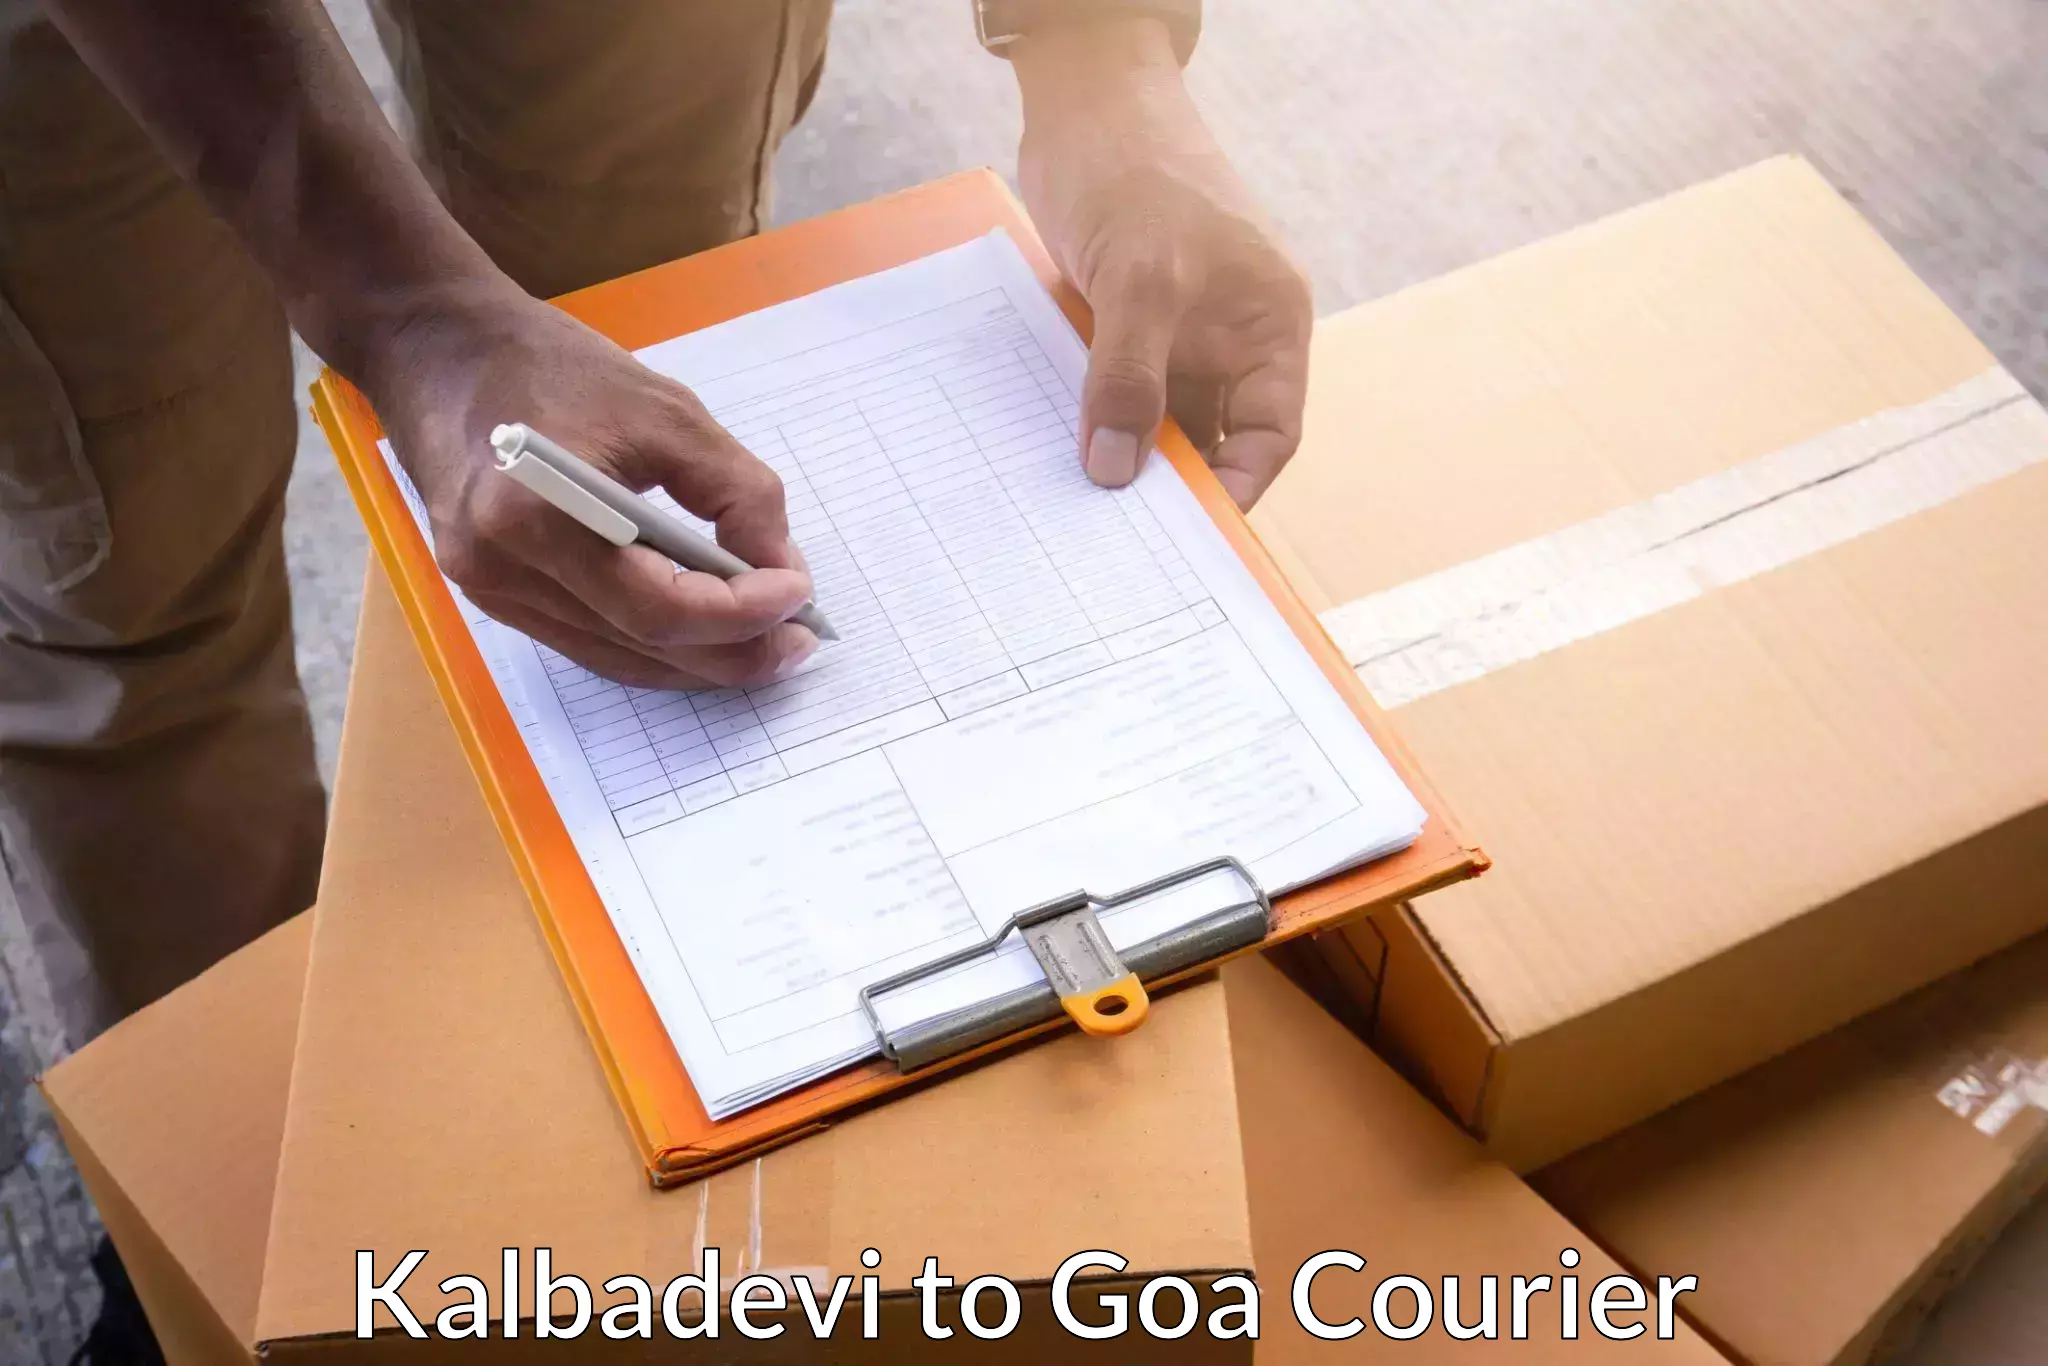 Online package tracking in Kalbadevi to Goa